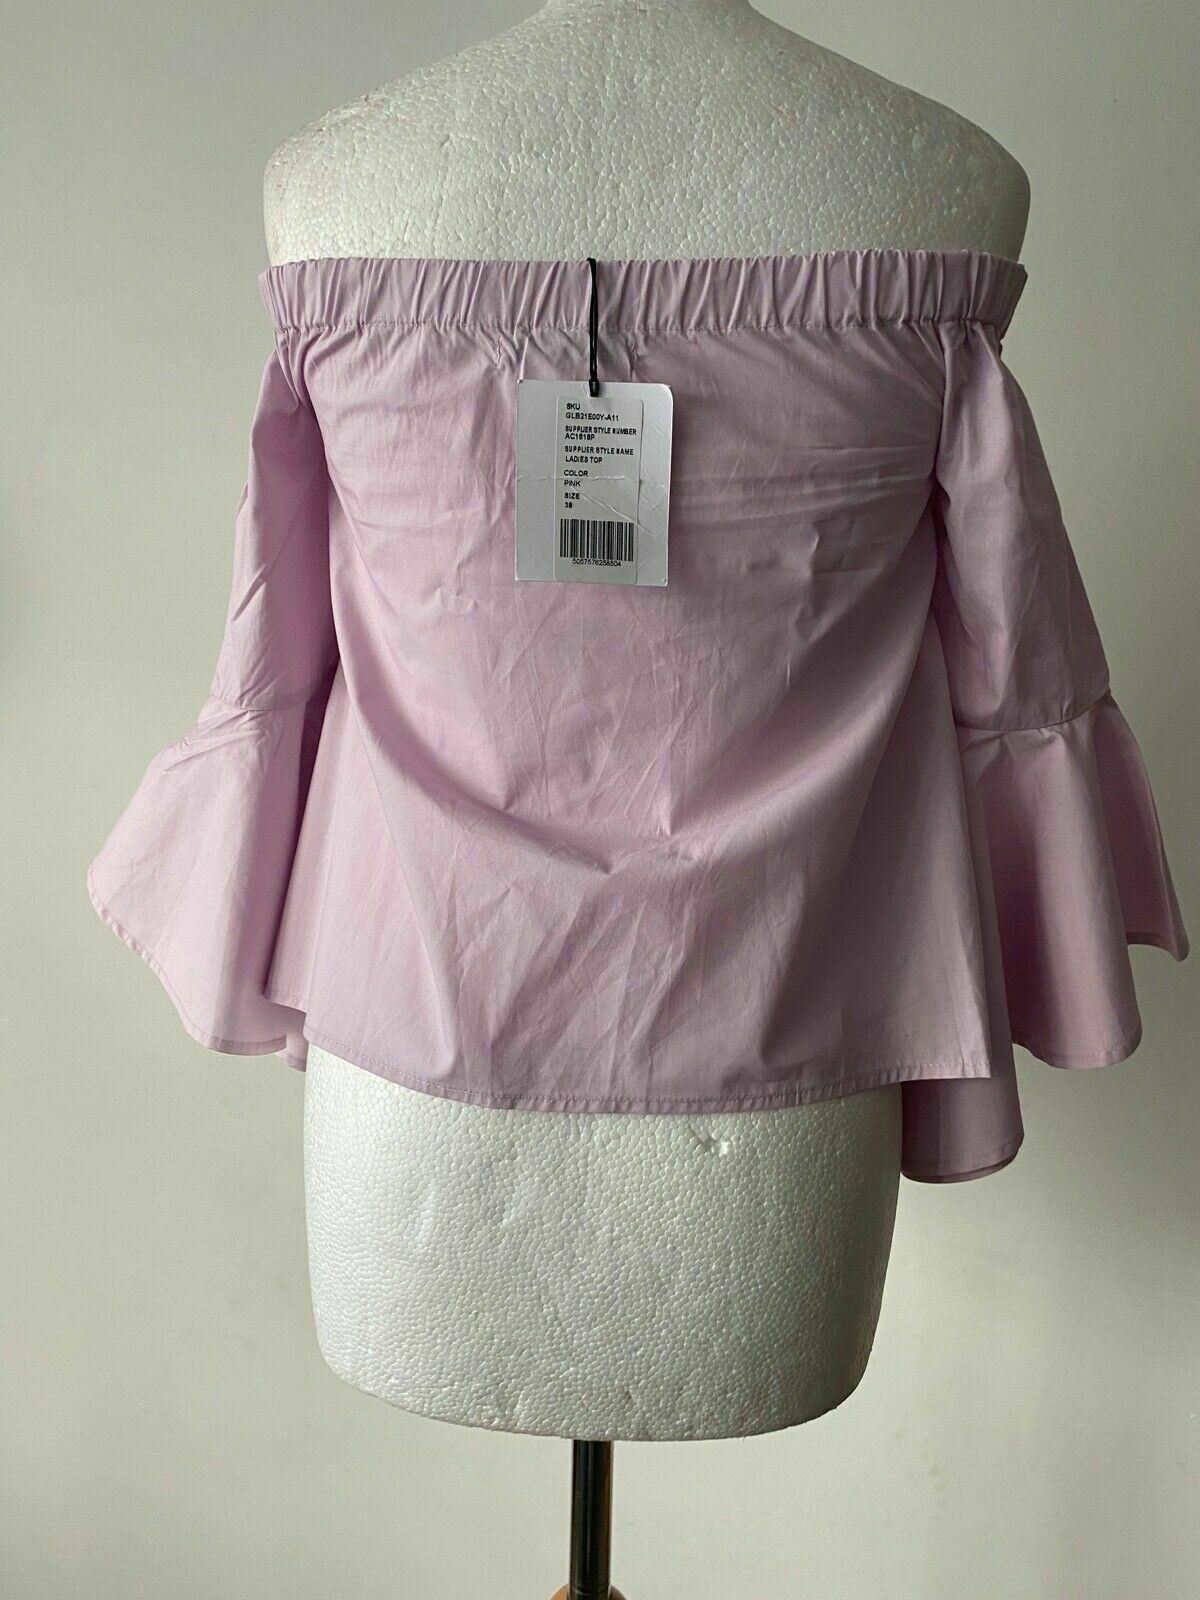 Glamorous Petite Pink Off the Shoulder Top Size 10 / 38 EUR